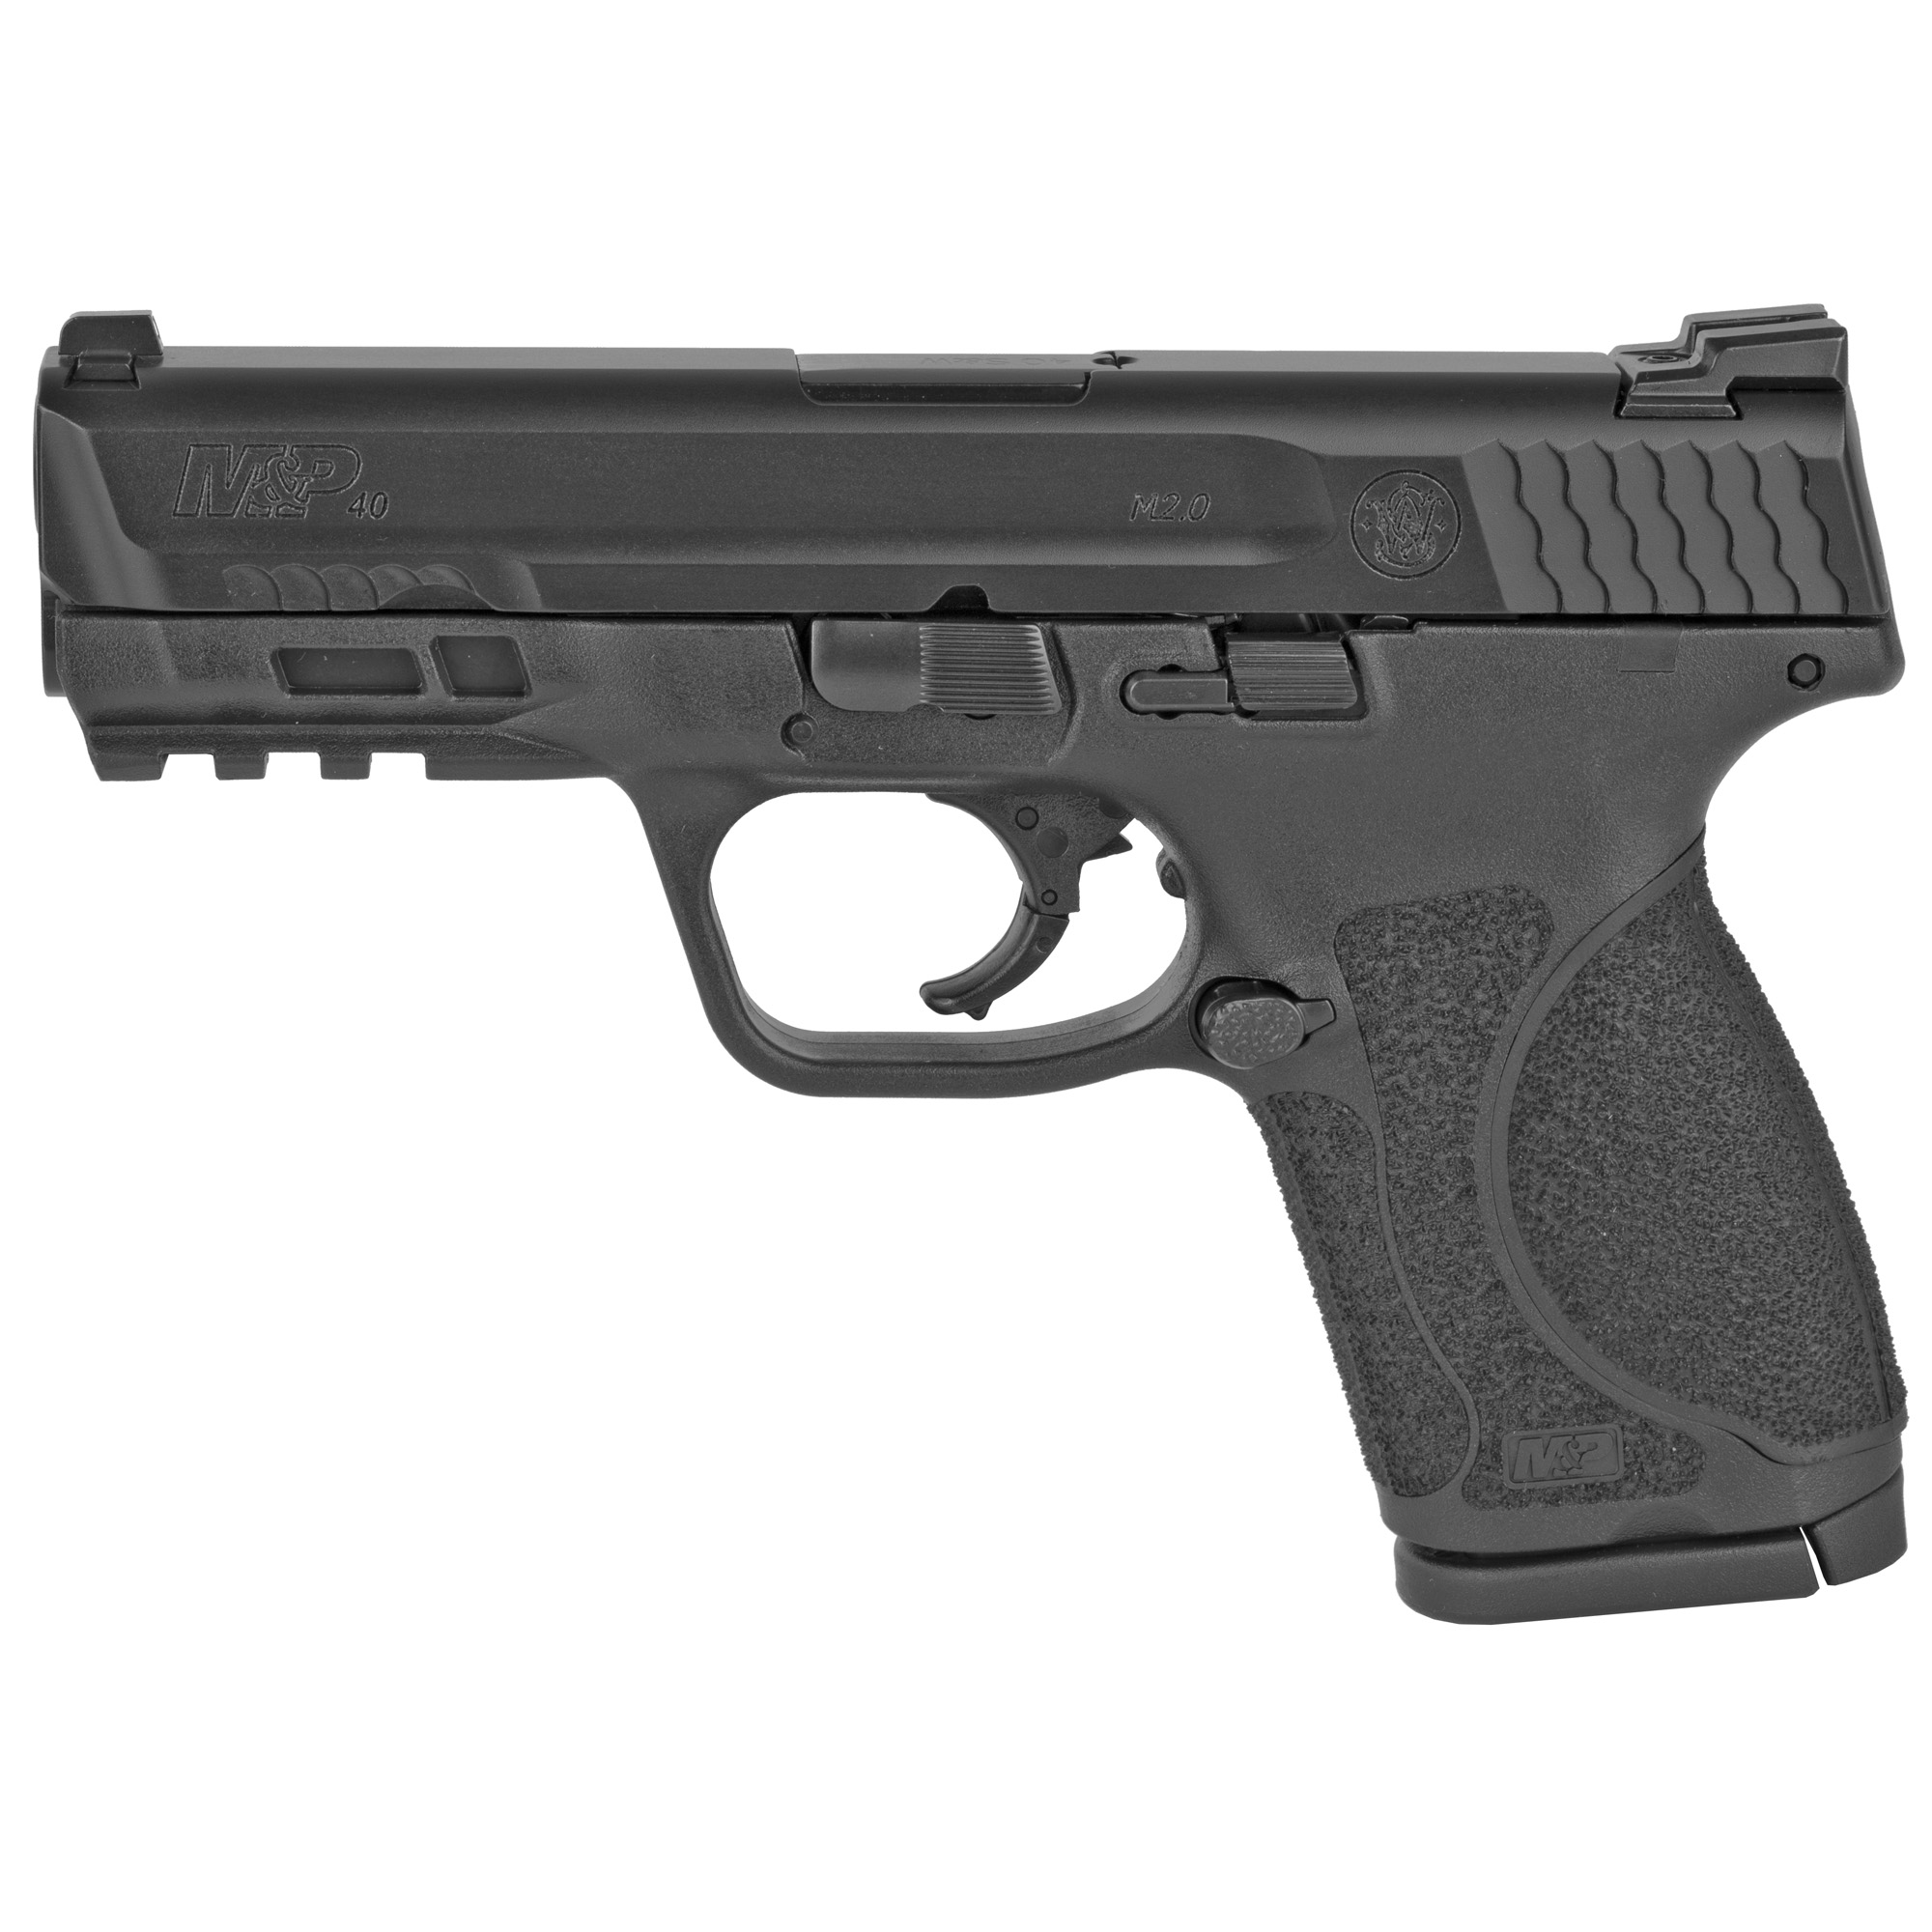 Smith & Wesson, M&P 2.0, Striker Fired, Semi-automatic, Polymer Frame Pistol, Compact, 40 S&W, 4" Barrel, Armornite Finish, Black, Fixed Sights, Manual Thumb Safety, 13 Rounds, 2 Magazines